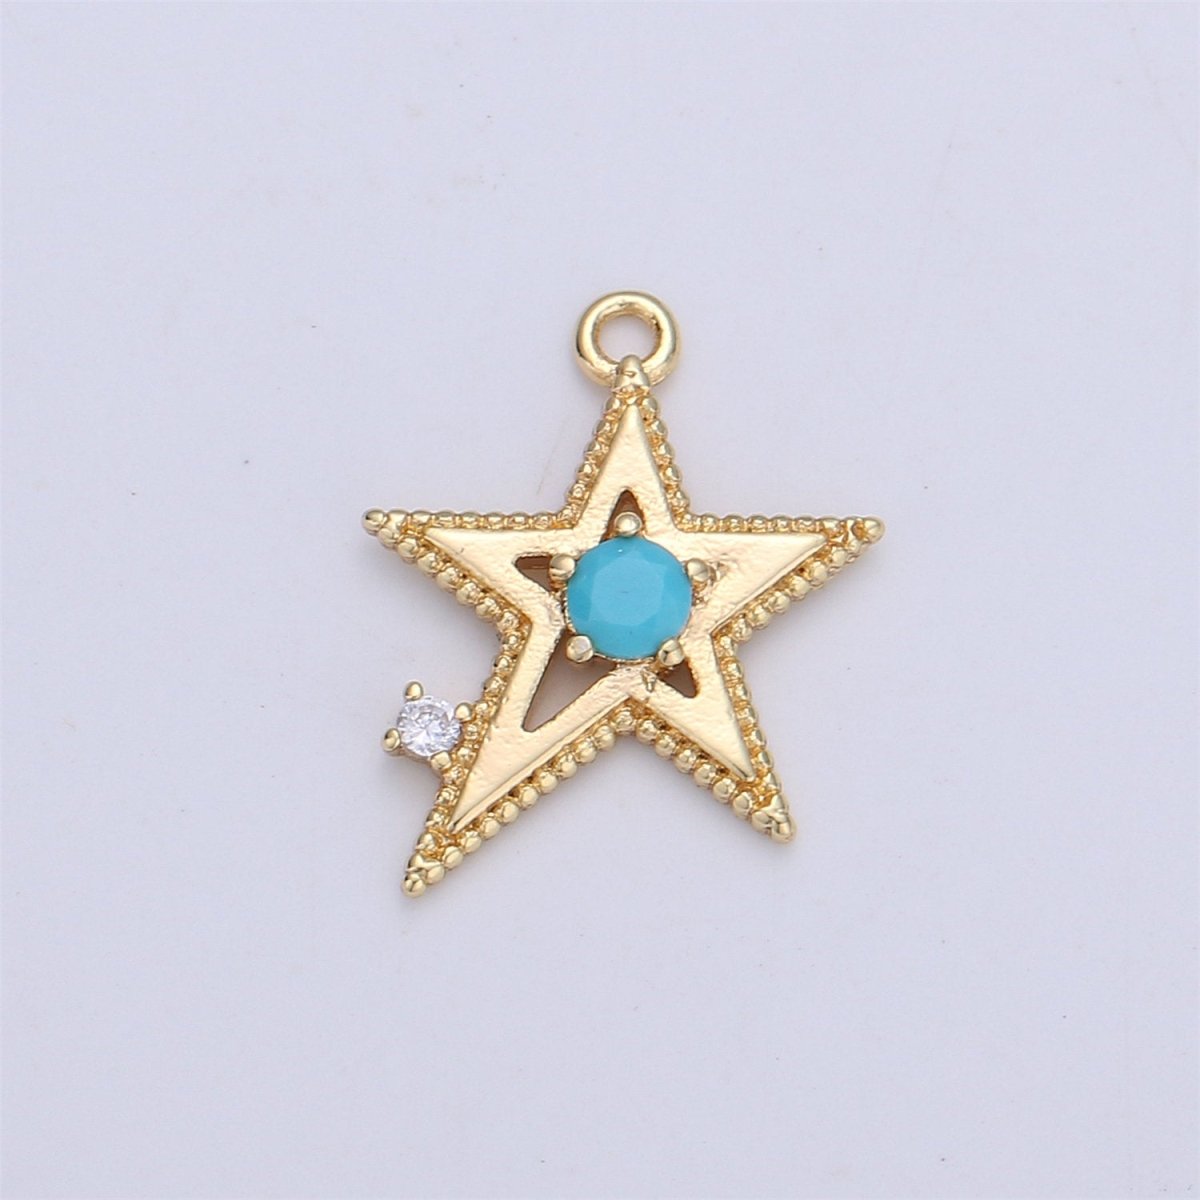 Pink Blue Clear Cubic star charm, 1 piece, 13x16mm 16K gold plated brass, CZ, Nickel free, Rock Star charm for Necklace Earring I-331 - DLUXCA